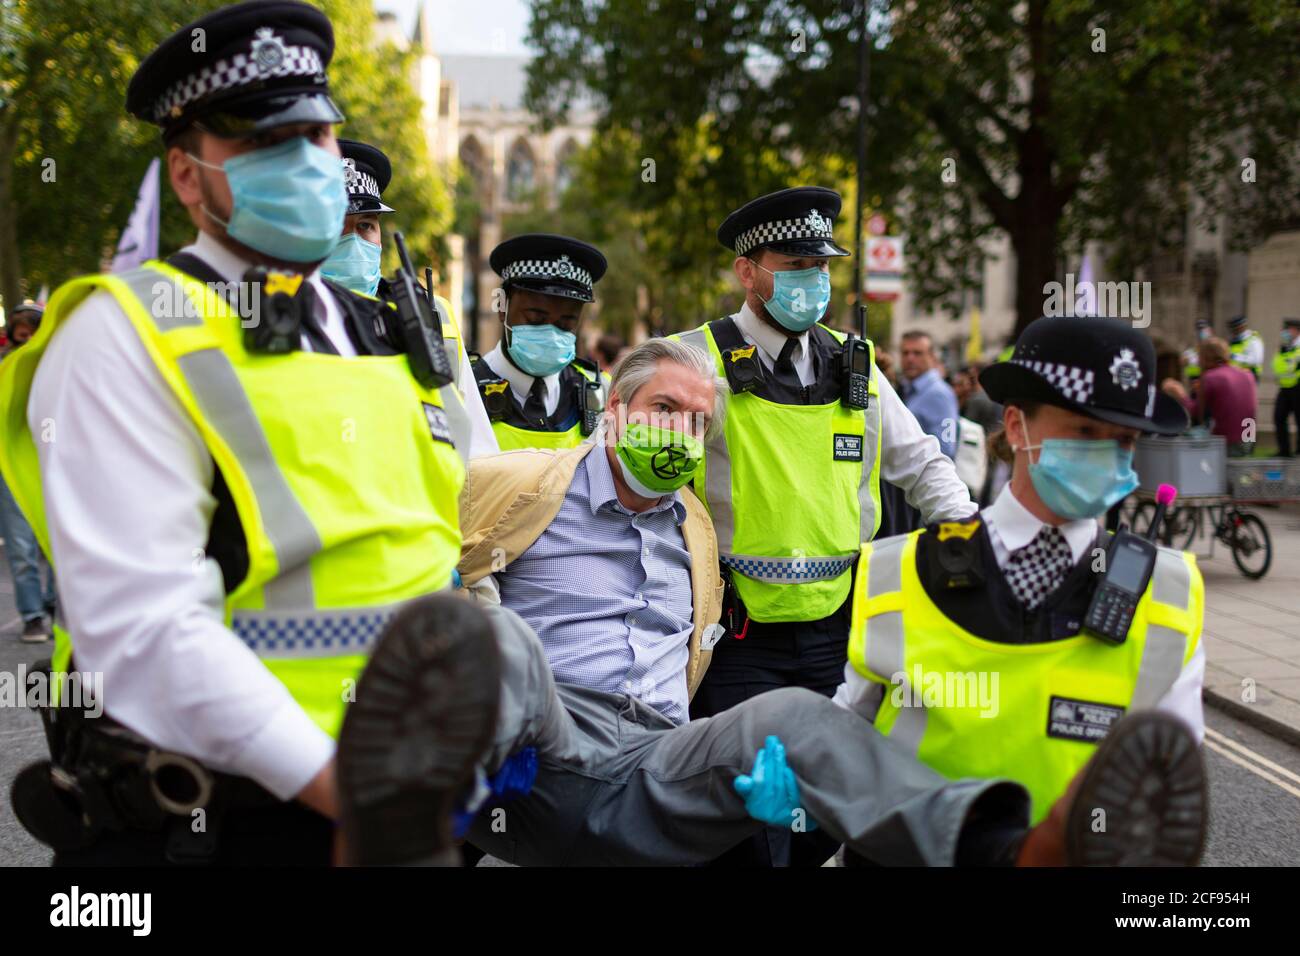 Arrested protester is carried off by police during Extinction Rebellion demonstration, Parliament Square, London, 1 September 2020 Stock Photo